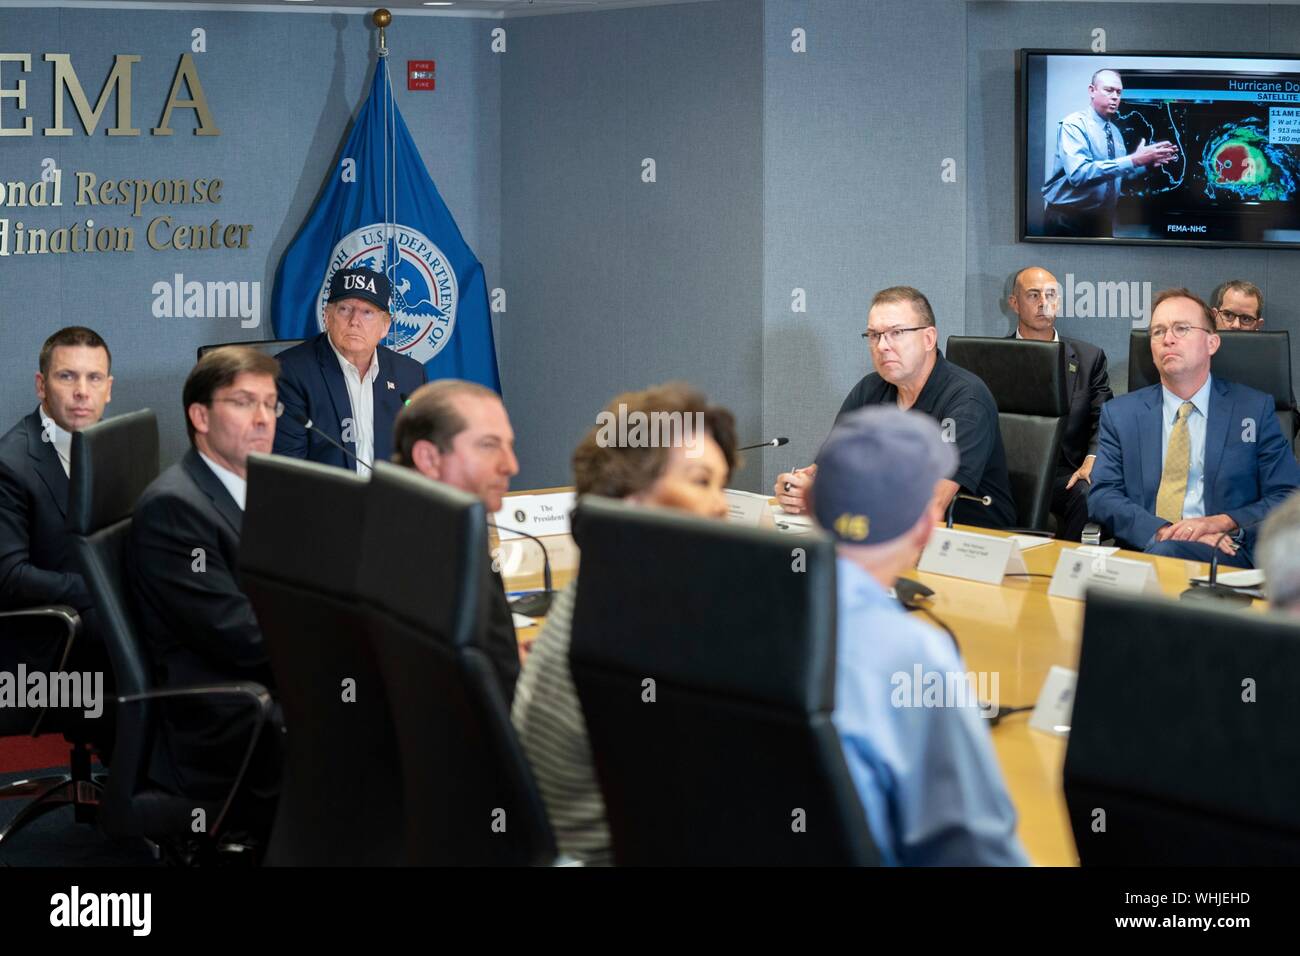 Washington, DC, USA, 01 September, 2019. U.S. President Donald Trump attends a briefing on catastrophic Hurricane Dorian at the Federal Emergency Management Agency September 1, 2019 in Washington, D.C.  Dorian struck the Bahamas as a Category 5 storm with winds of 185 mph and is now approaching Florida. Credit: Shealah Craighead/Planetpix/Alamy Live News Stock Photo